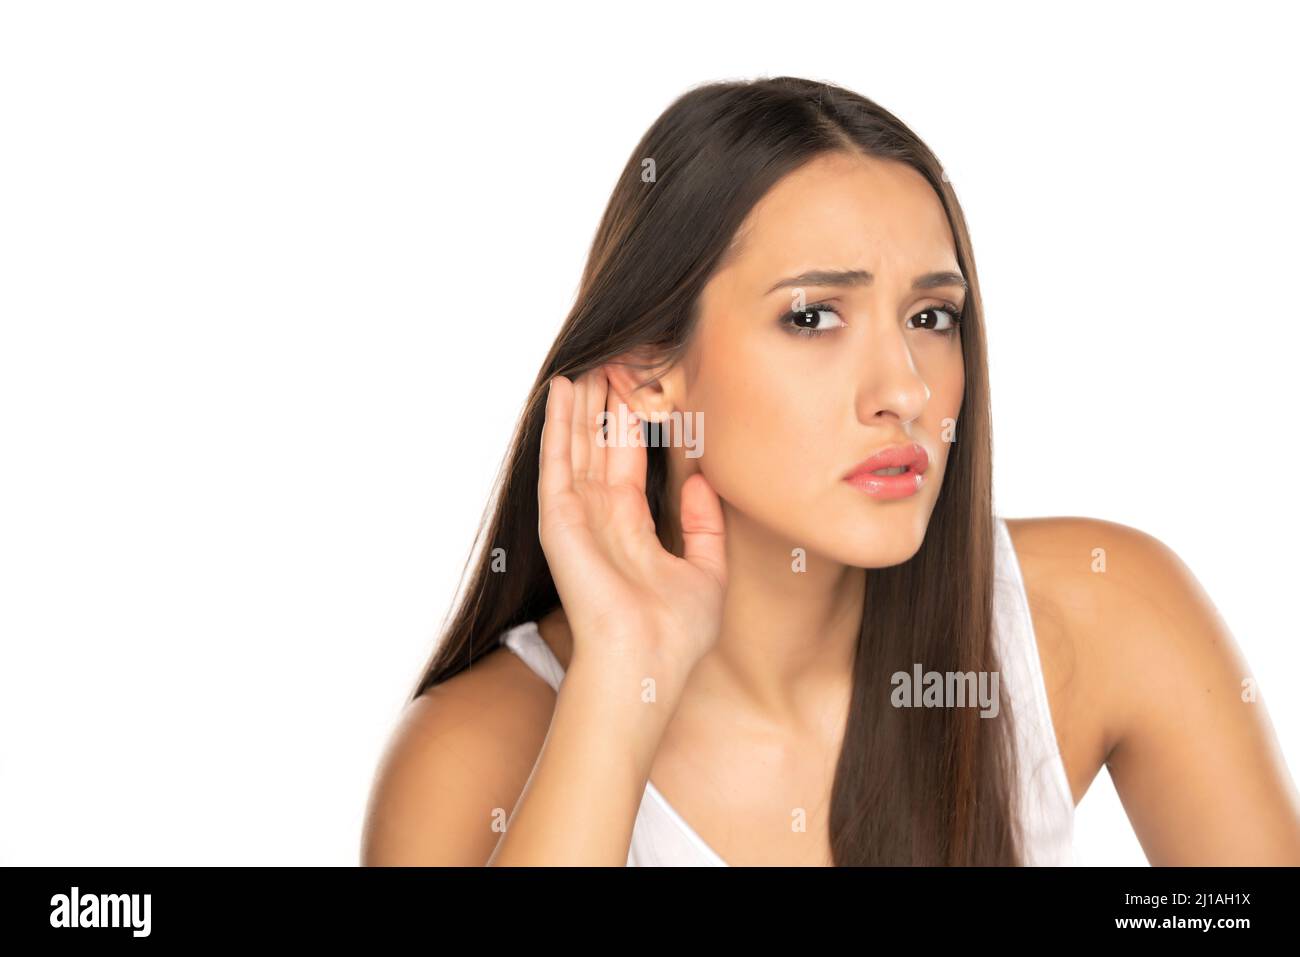 Young woman over isolated white background listening to something by putting hand on the ear Stock Photo